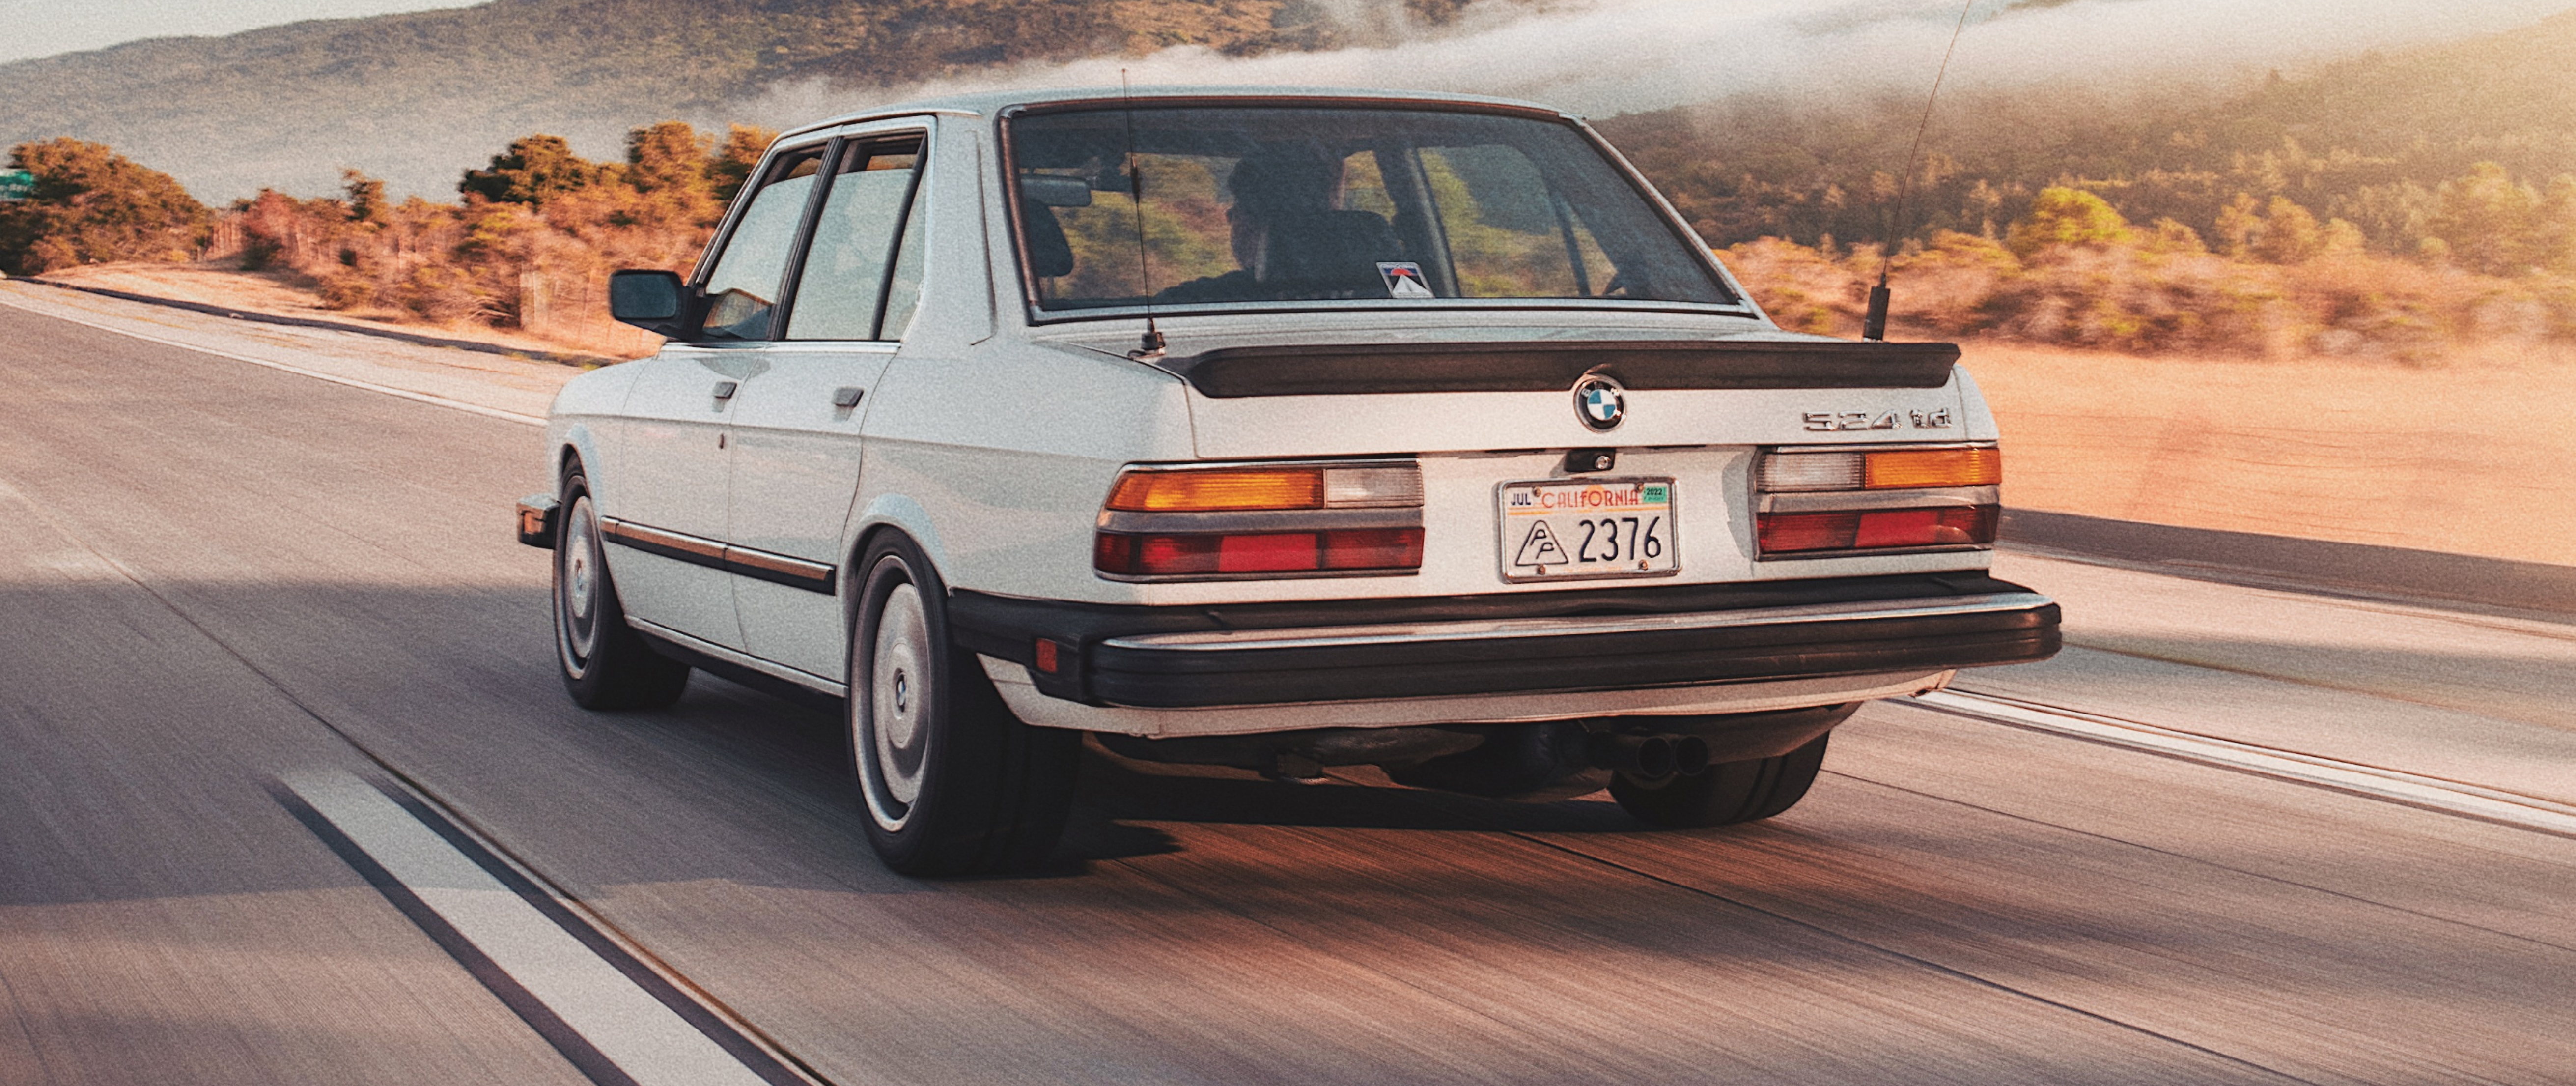 Enthusiast Roundtable: The BMW E28 is a classic driver for the modern world